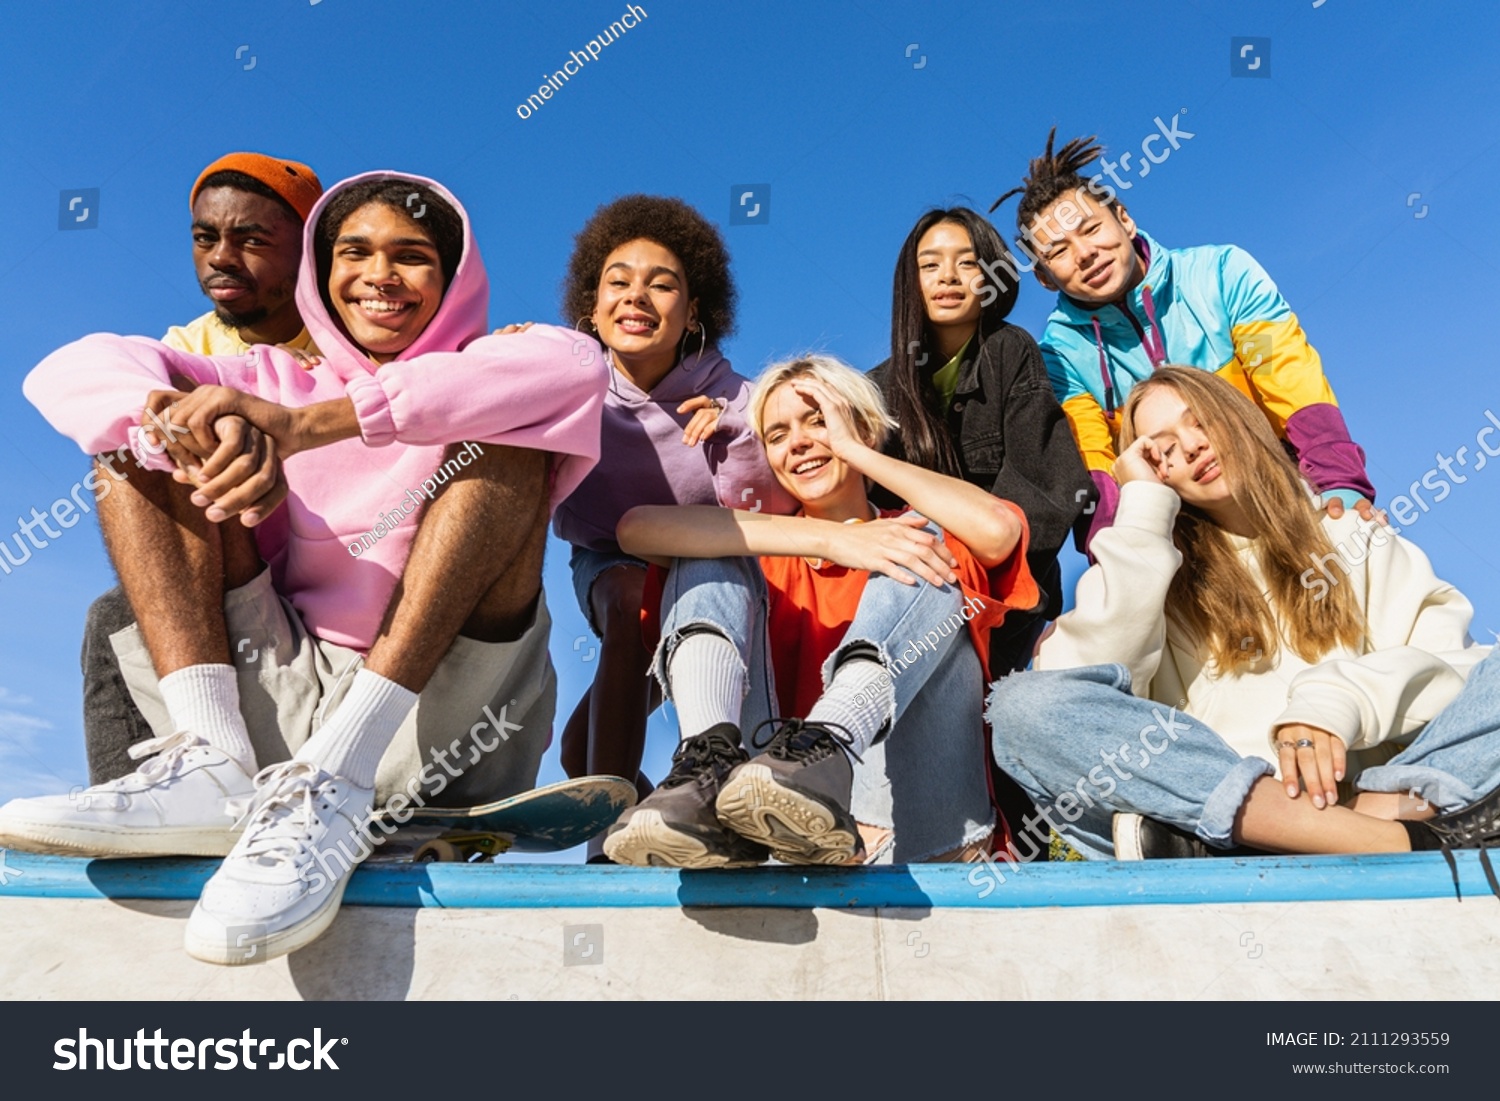 Multicultural group of young friends bonding outdoors and having fun - Stylish cool teens gathering at urban skate park #2111293559